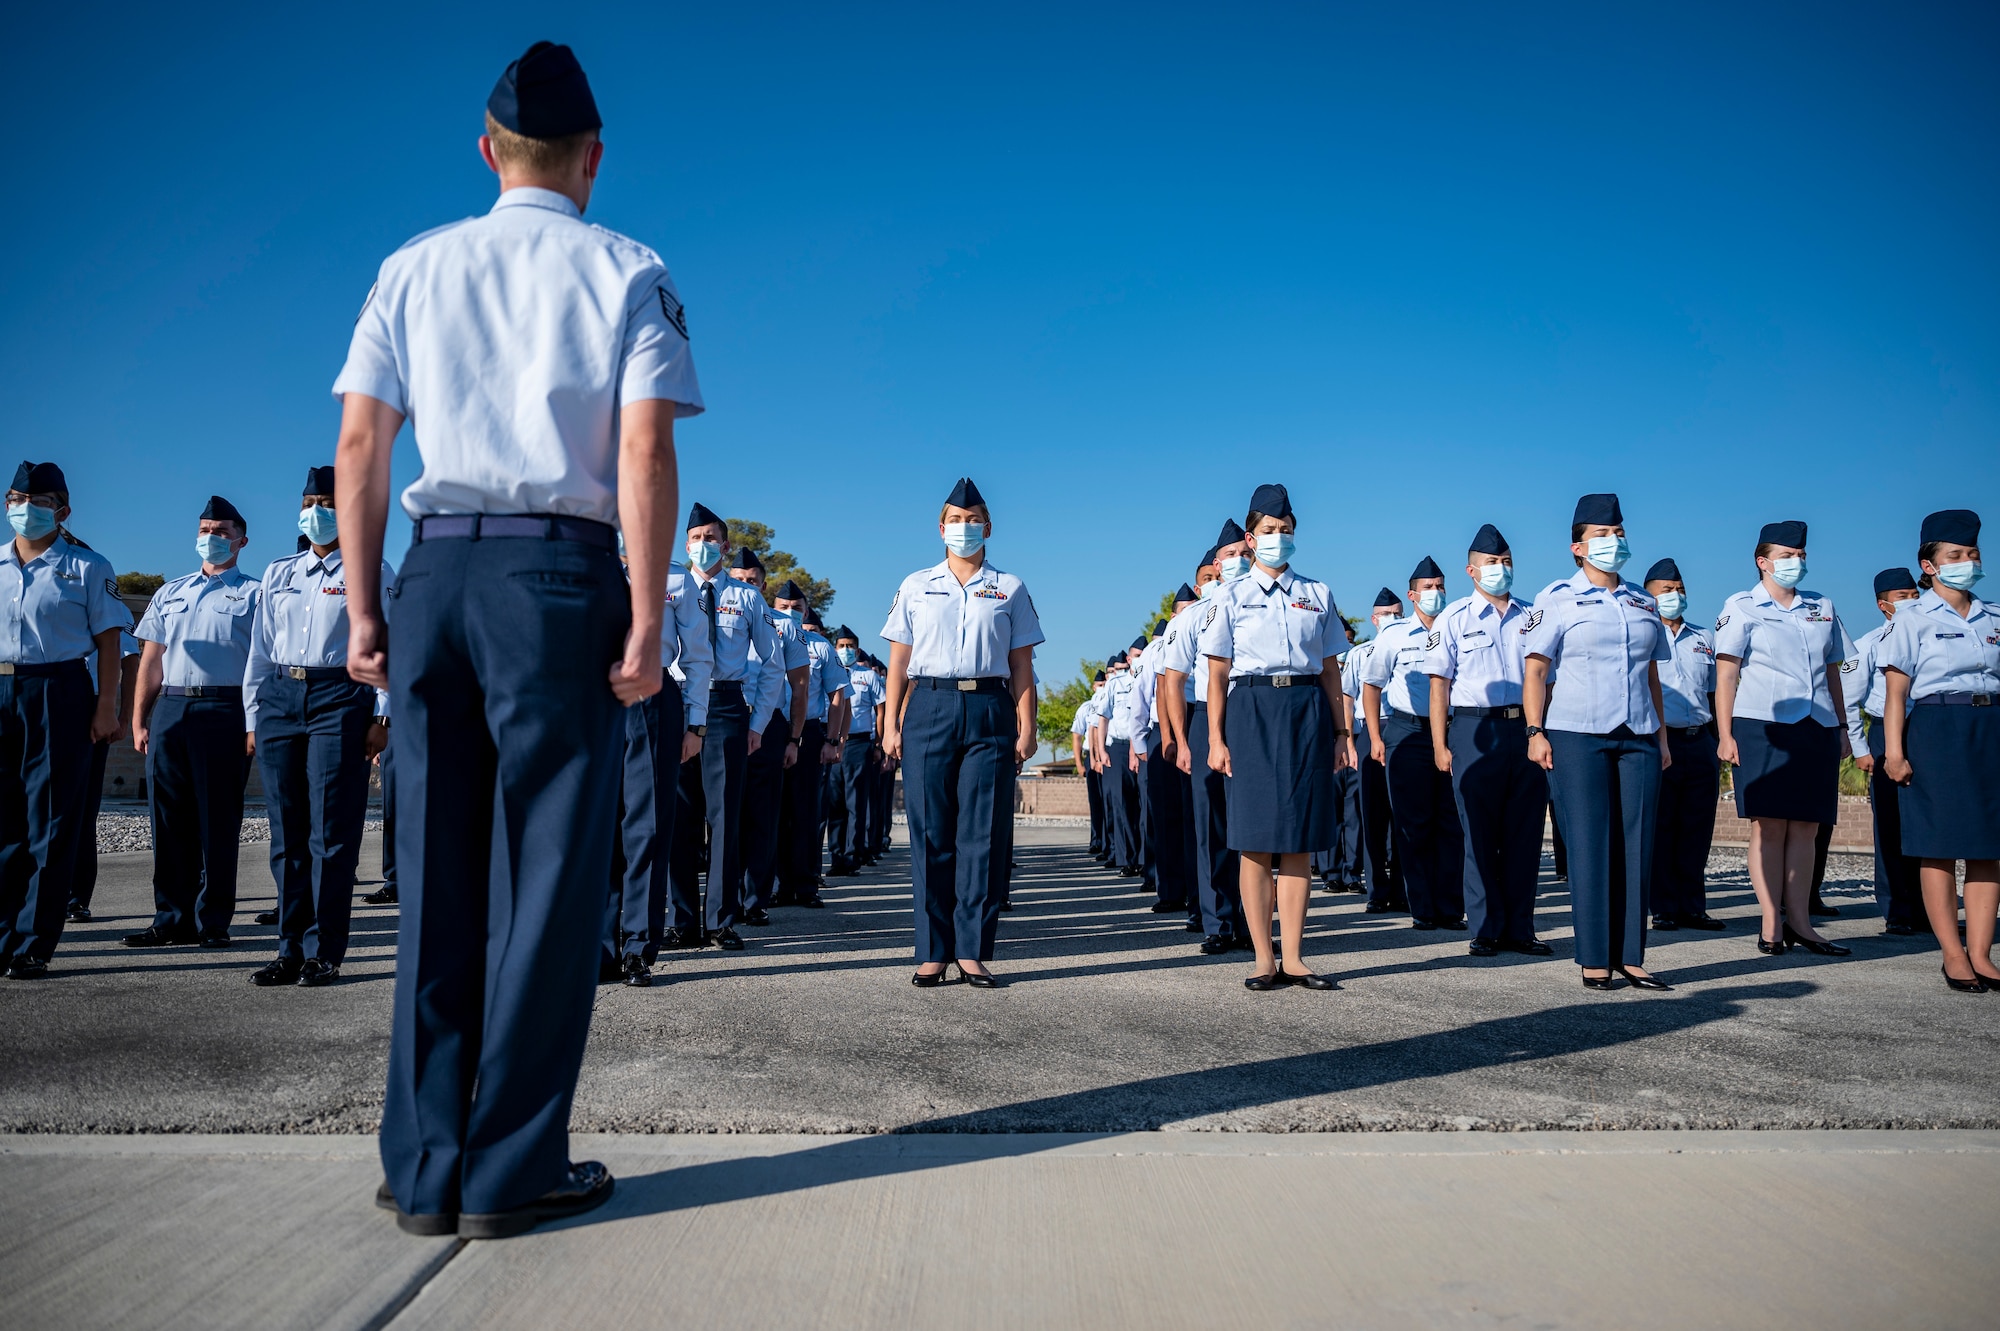 Students from the Nellis Airman Leadership School, prepare to perform reveille.